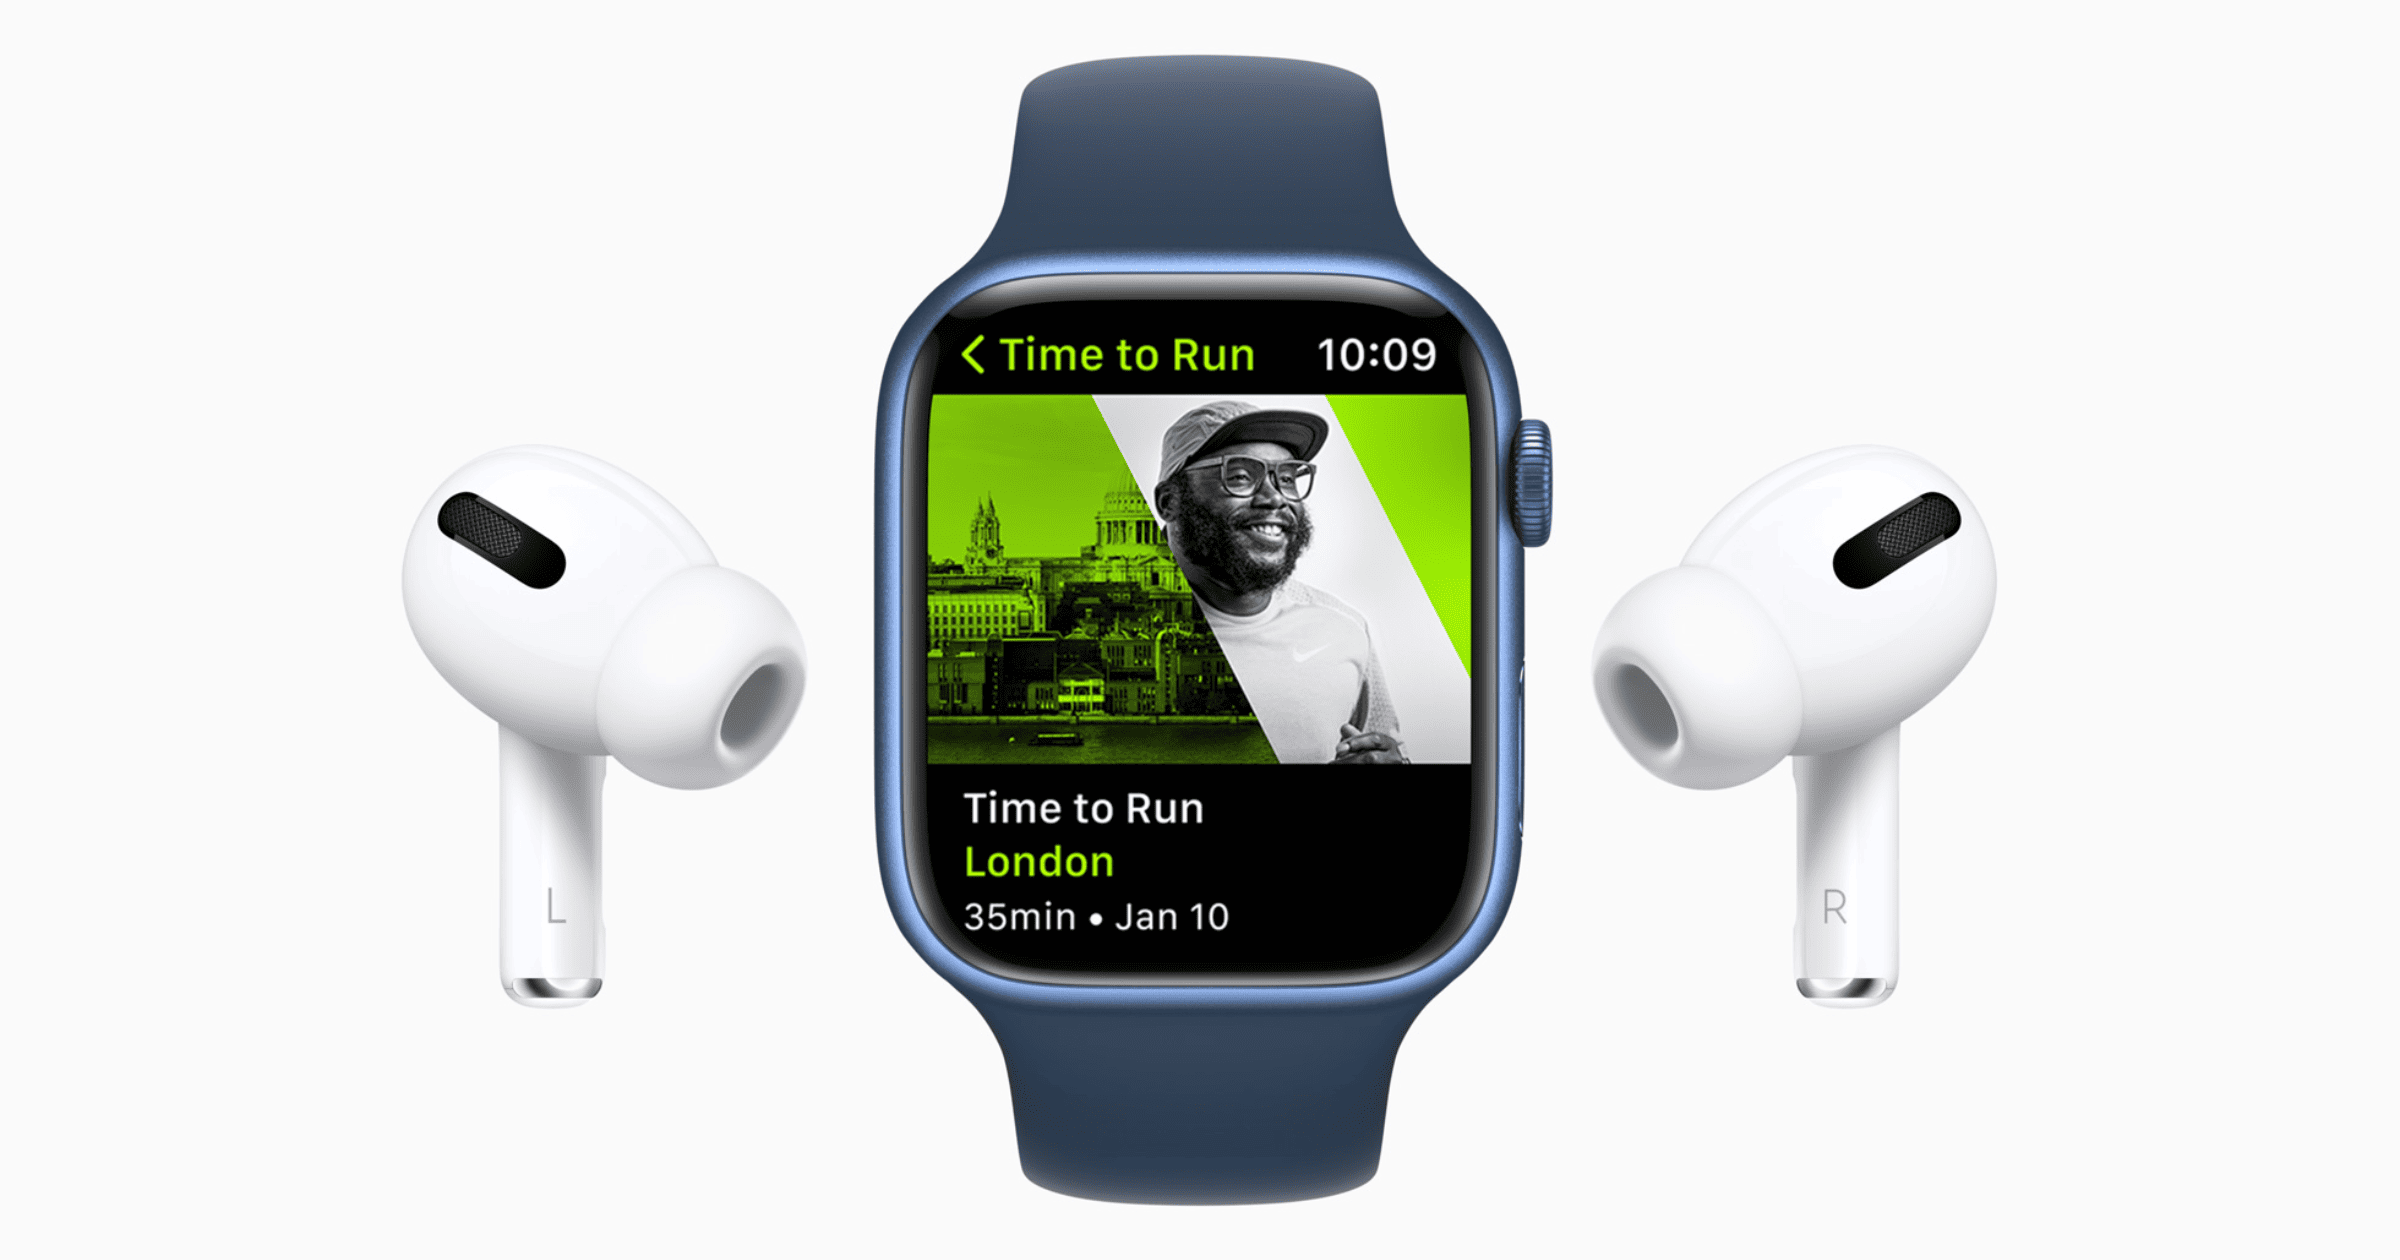 Apple Fitness+ Time to Run